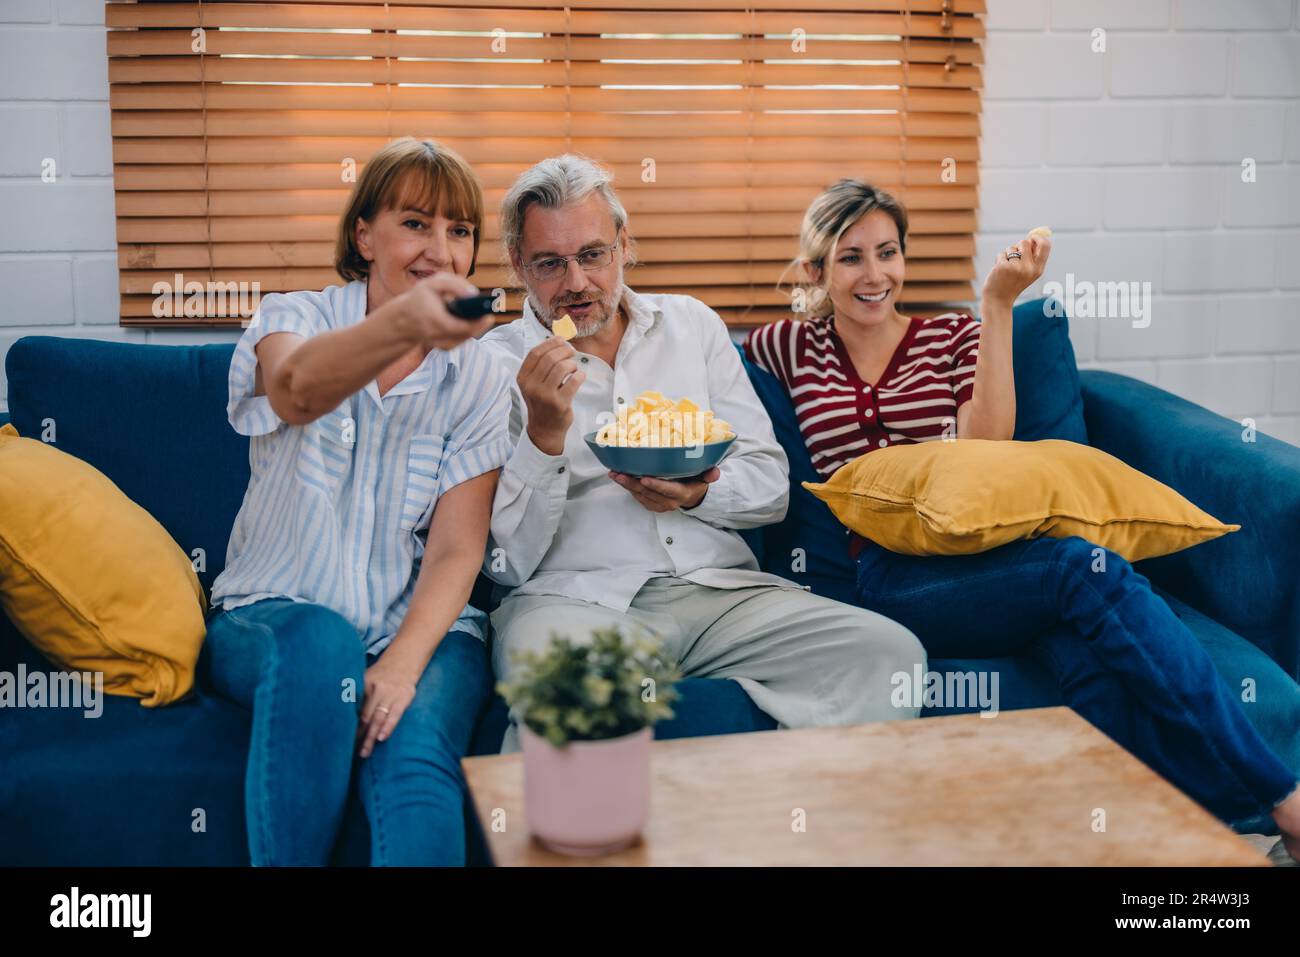 Members of the family from multiple generations enjoy quality time together by watching television, sharing snacks and conversation, discovering new a Stock Photo